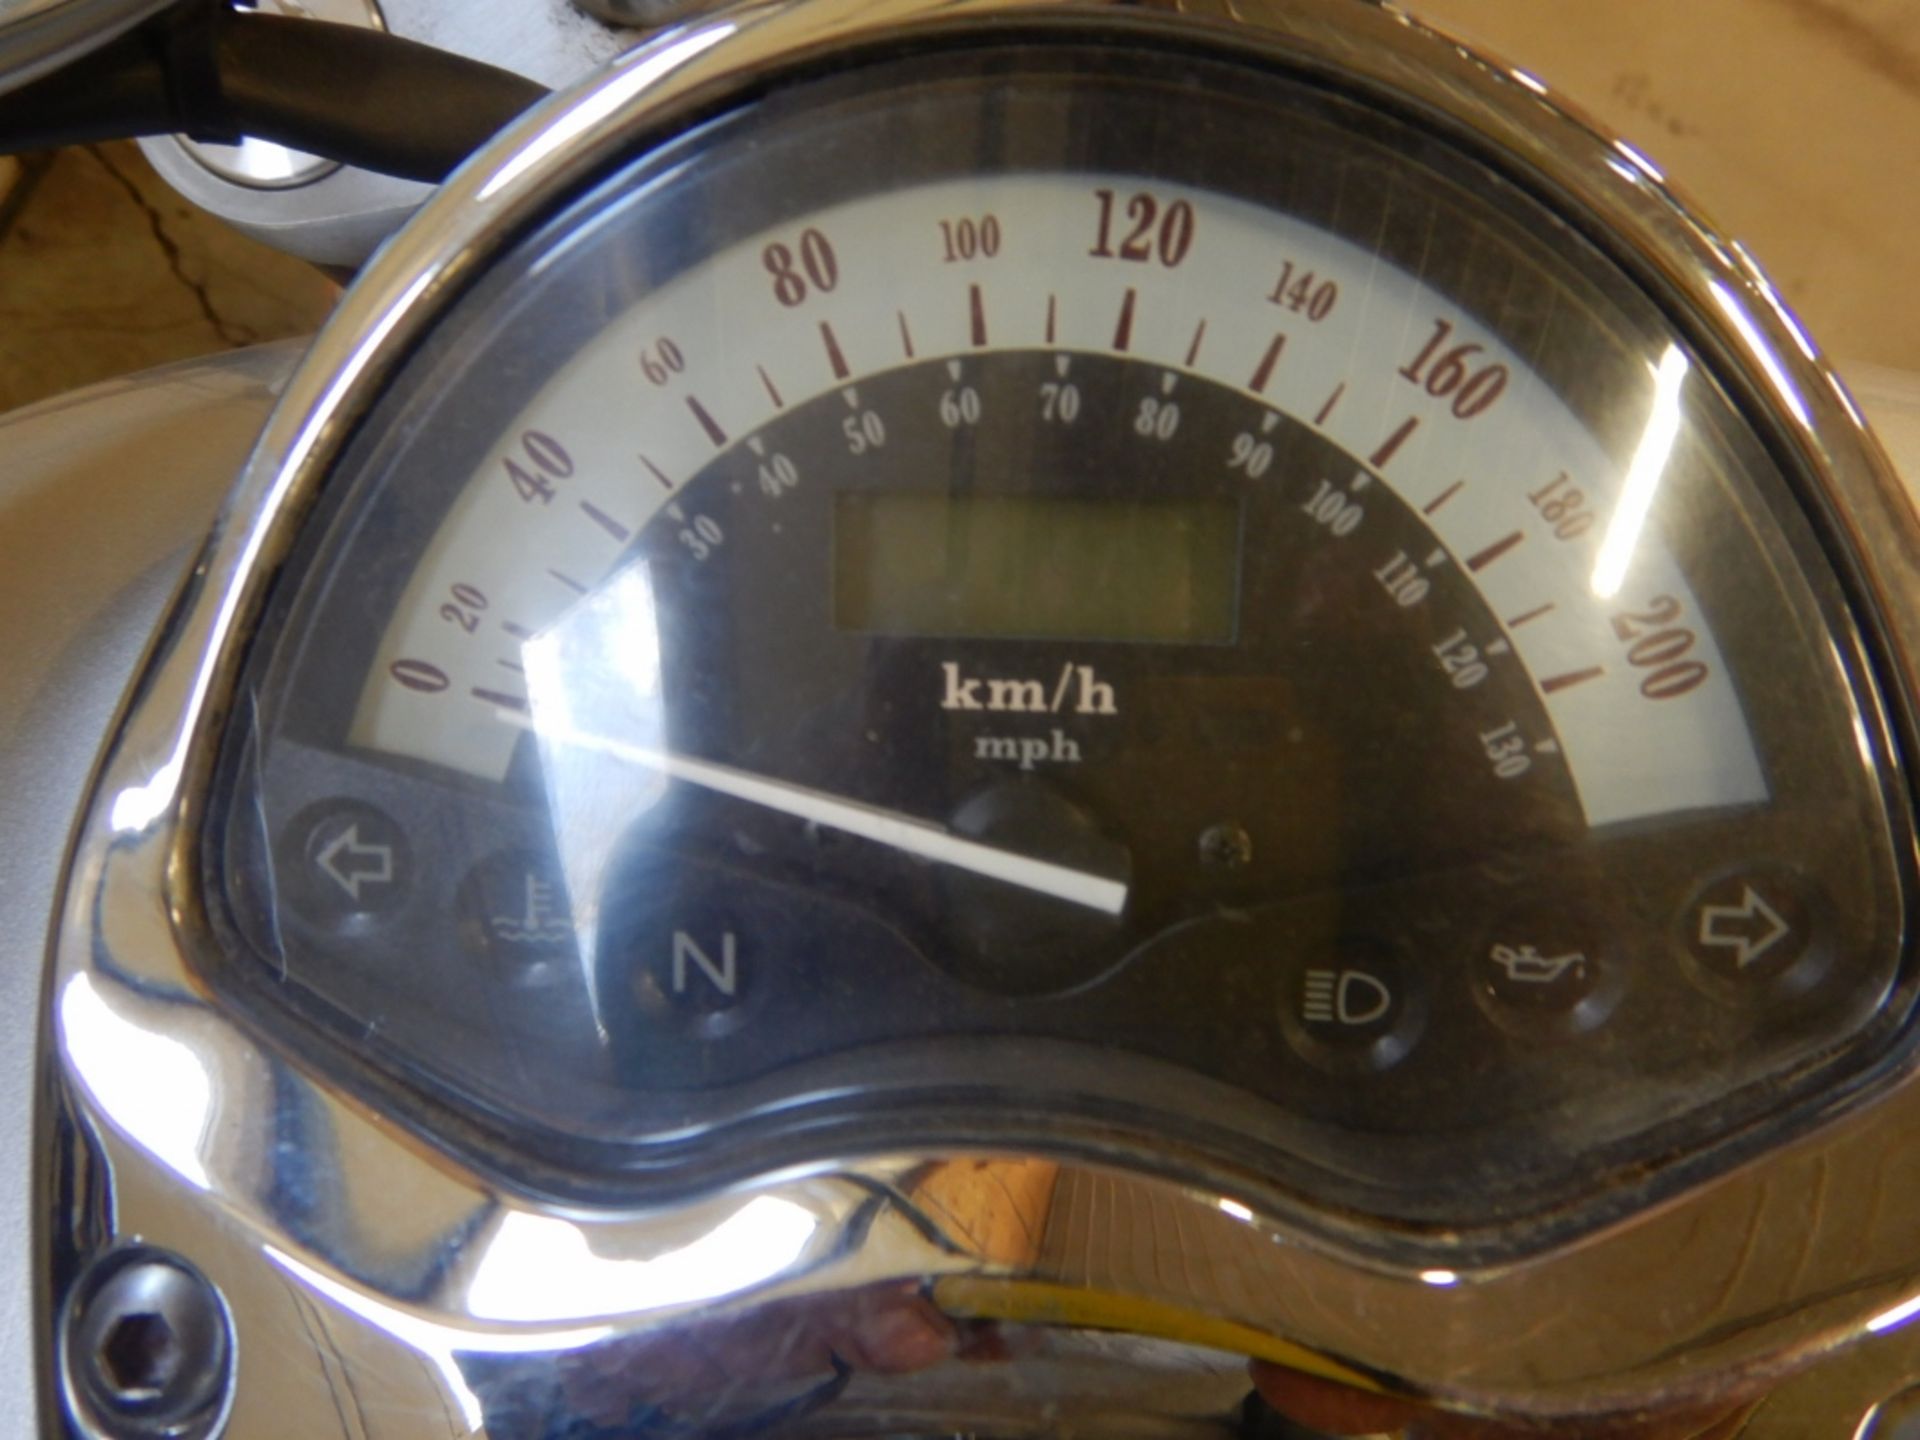 2006 HONDA VTX1300S6 MOTORCYCLE W/ WINDSHIELD INCLUDED (INSTALLATION REQUIRED) 5067 KM SHOWING - Image 9 of 12